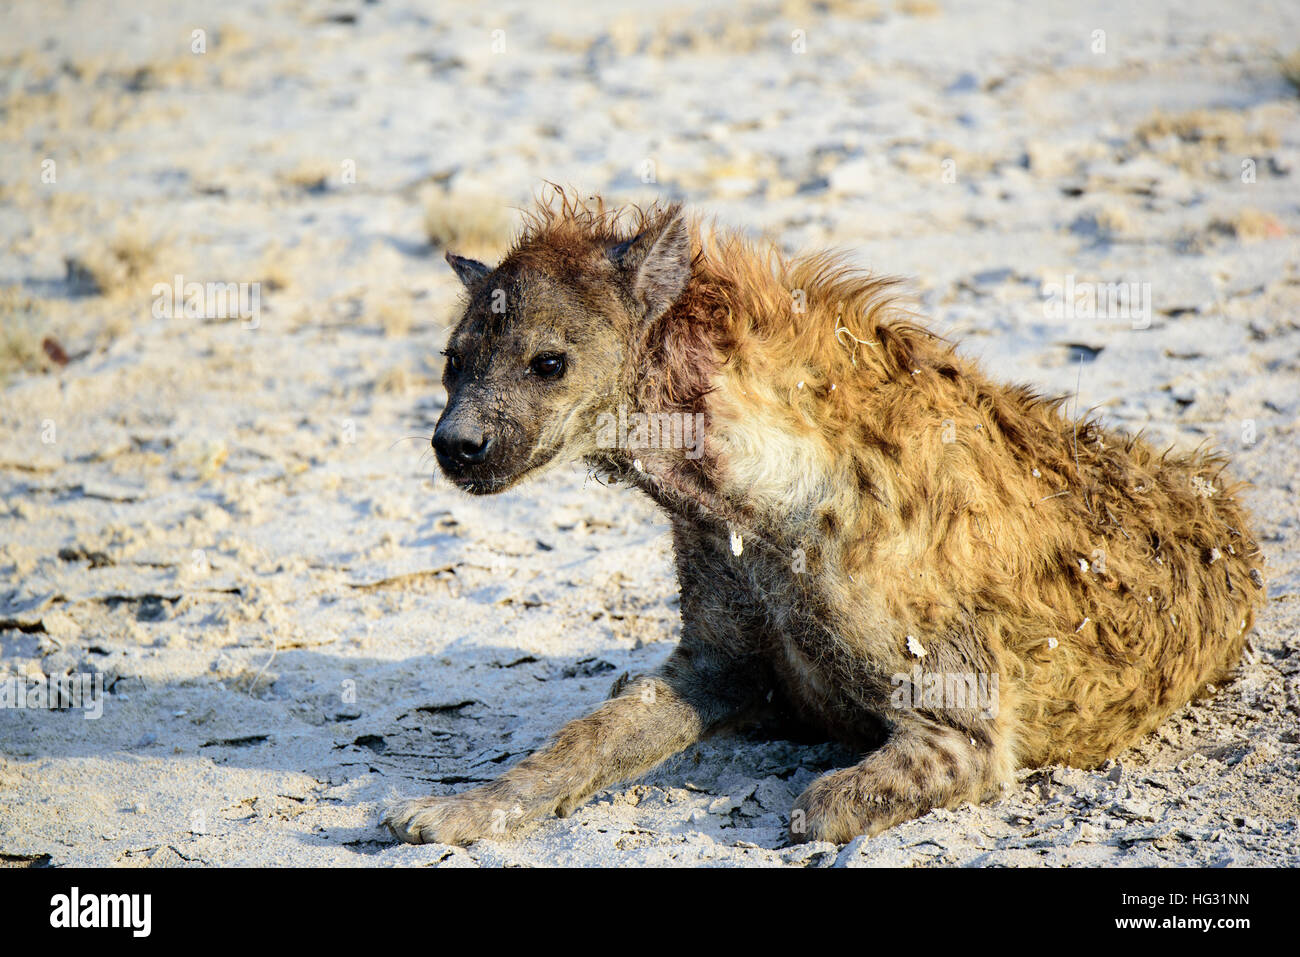 Close up of a bloodied hyena laying down Stock Photo